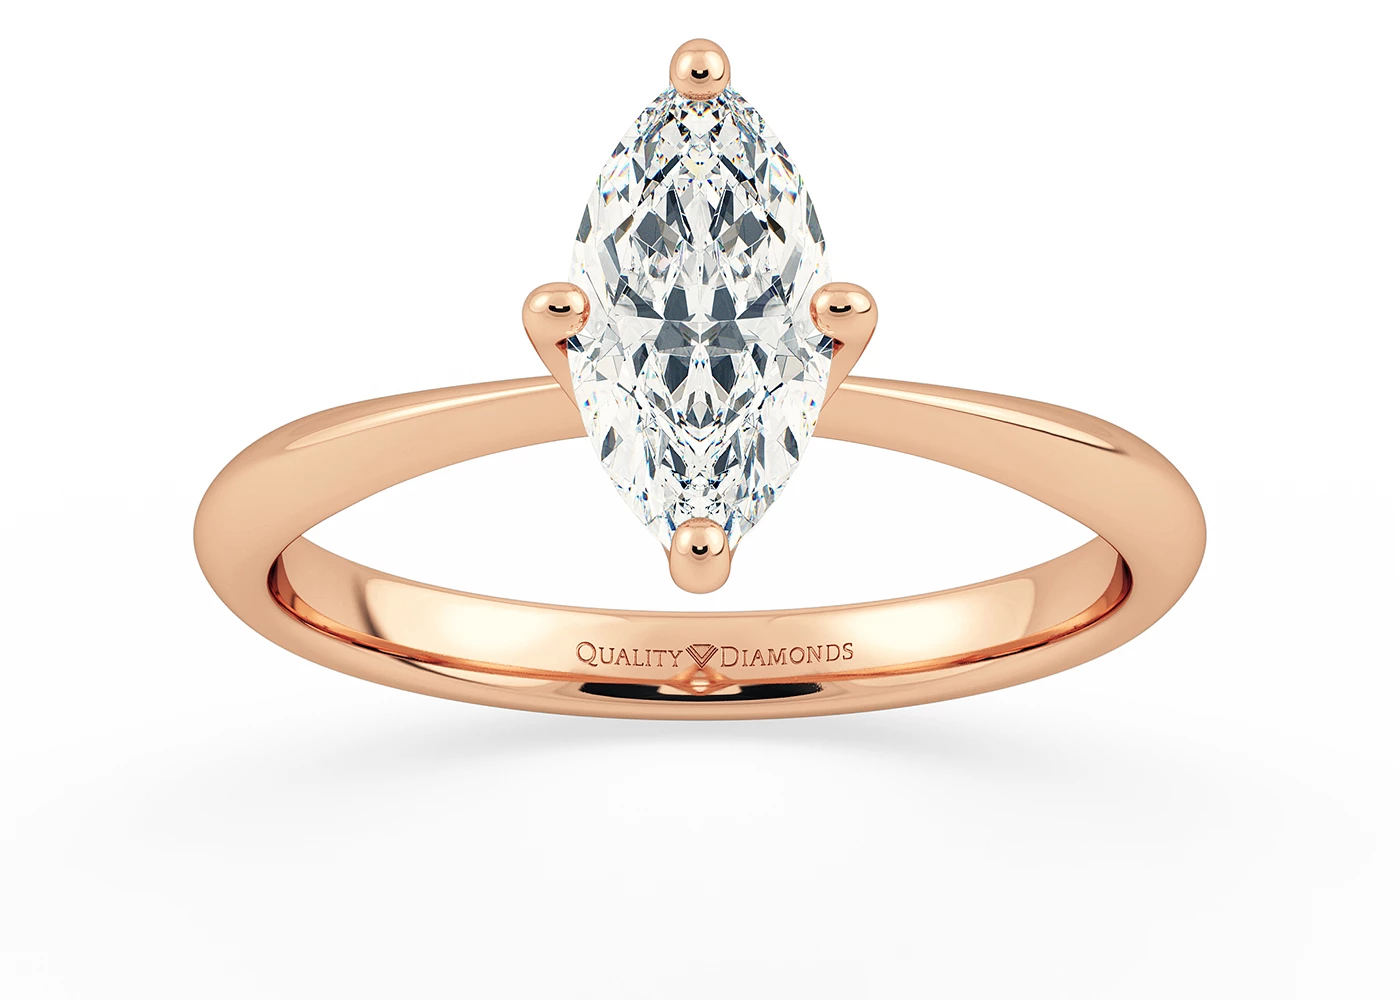 One Carat Marquise Solitaire Diamond Engagement Ring in 18K Rose Gold